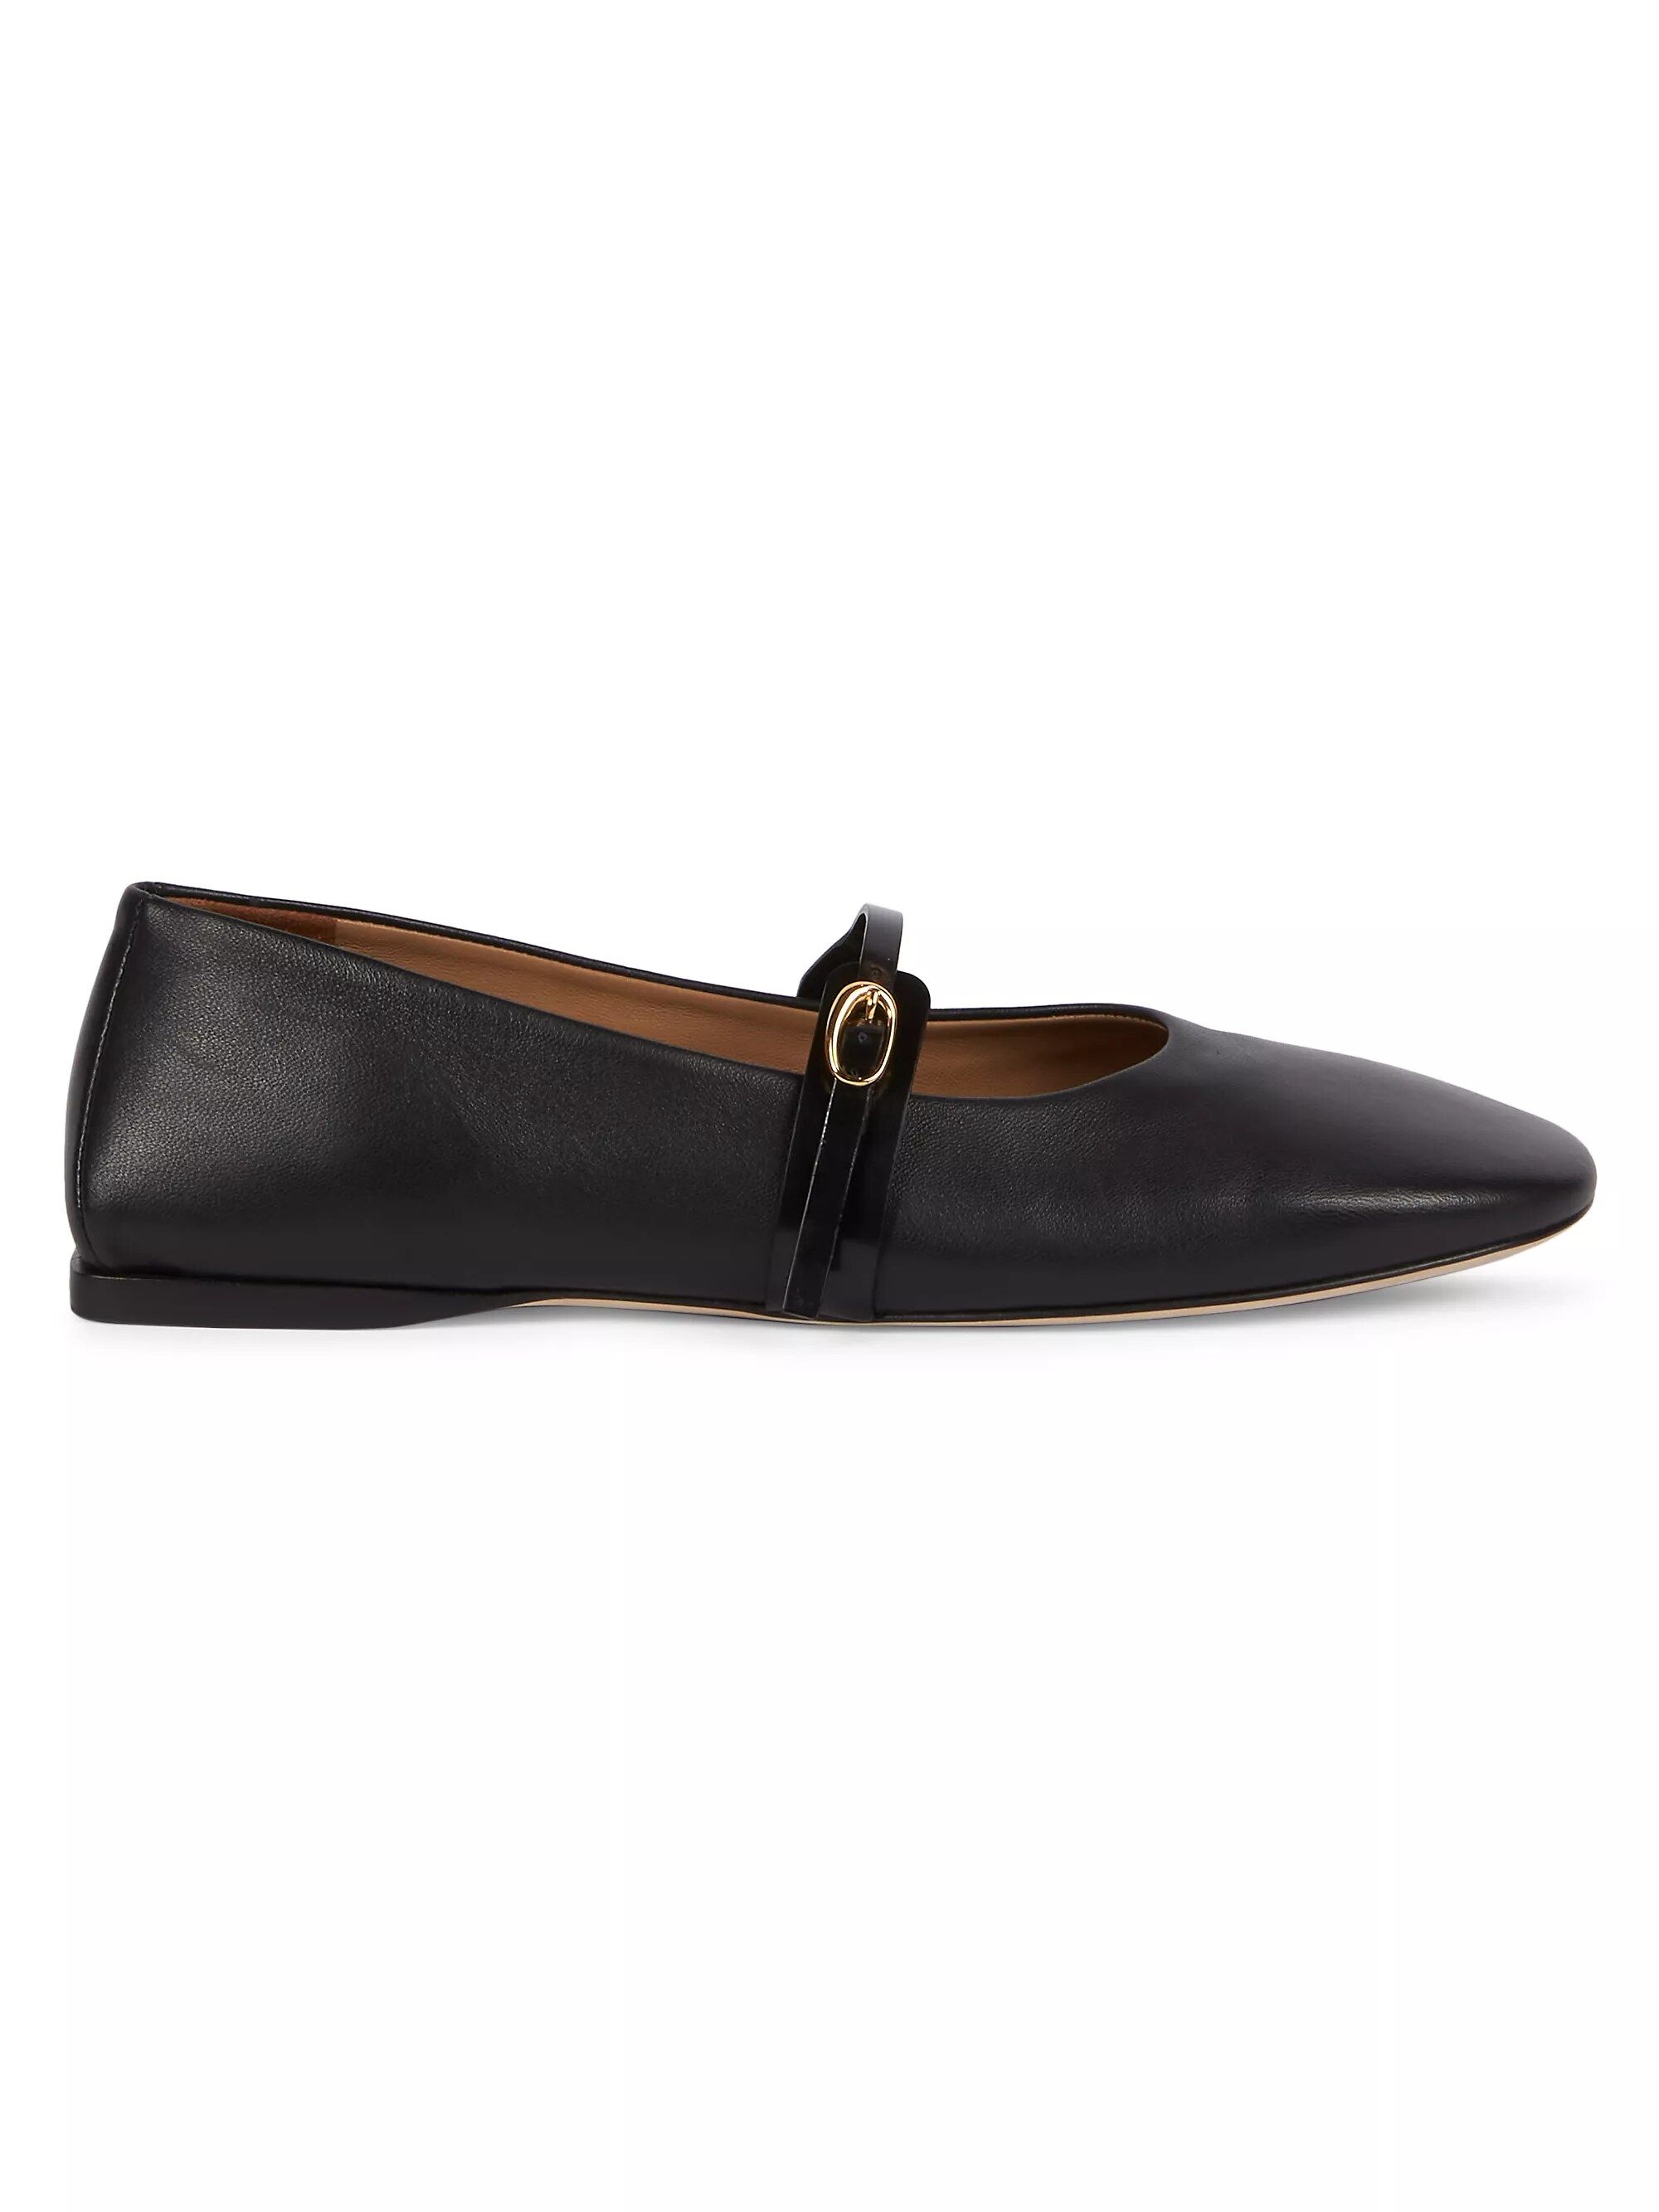 Les Ballerines Rondes Leather Flats | Saks Fifth Avenue